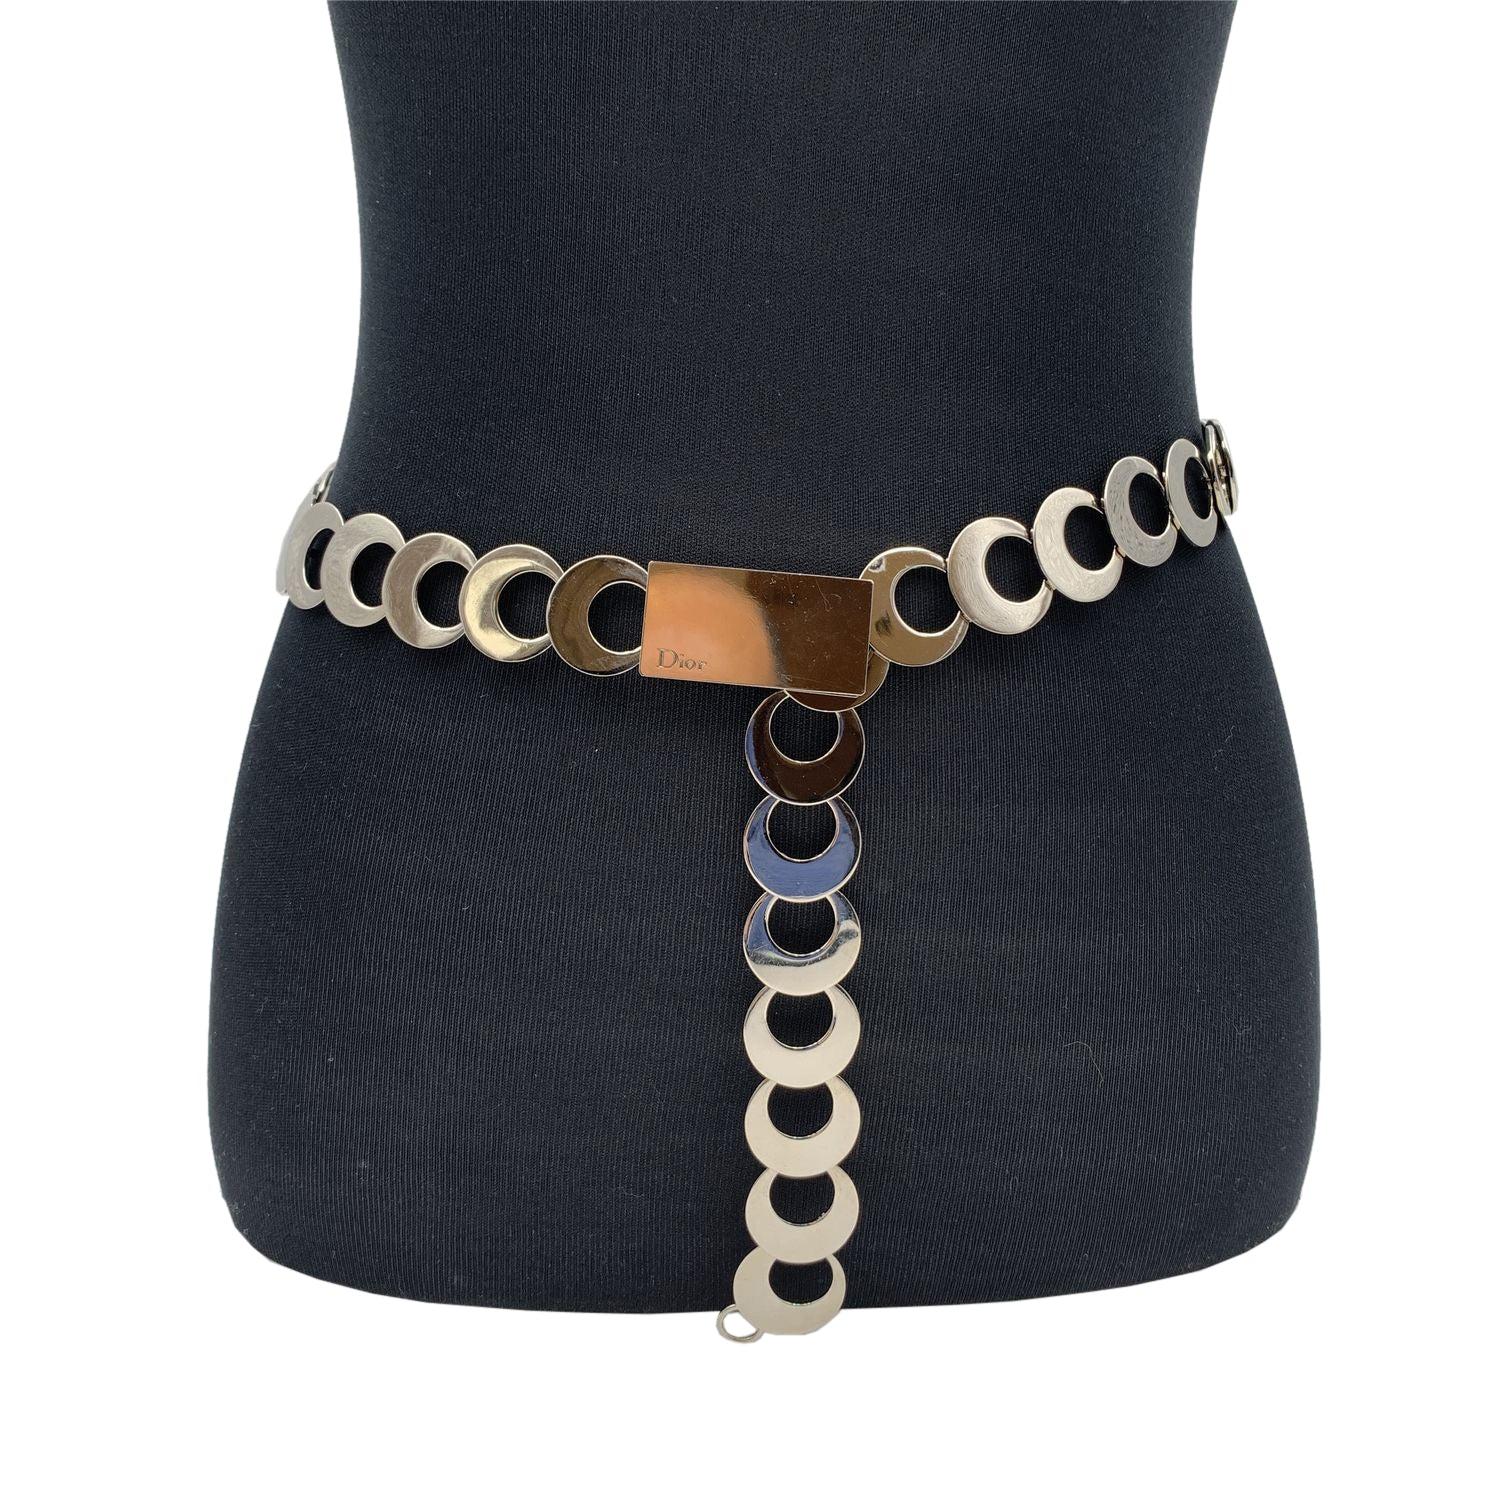 Chanel vintage silver metal chain belt . It is very versatile and will complete every look (you can use it as a necklace or as a belt). It features silver metal chain link. Hook closure. Total length: 36 inches - 91.4 cm . 'Dior' engraved on the